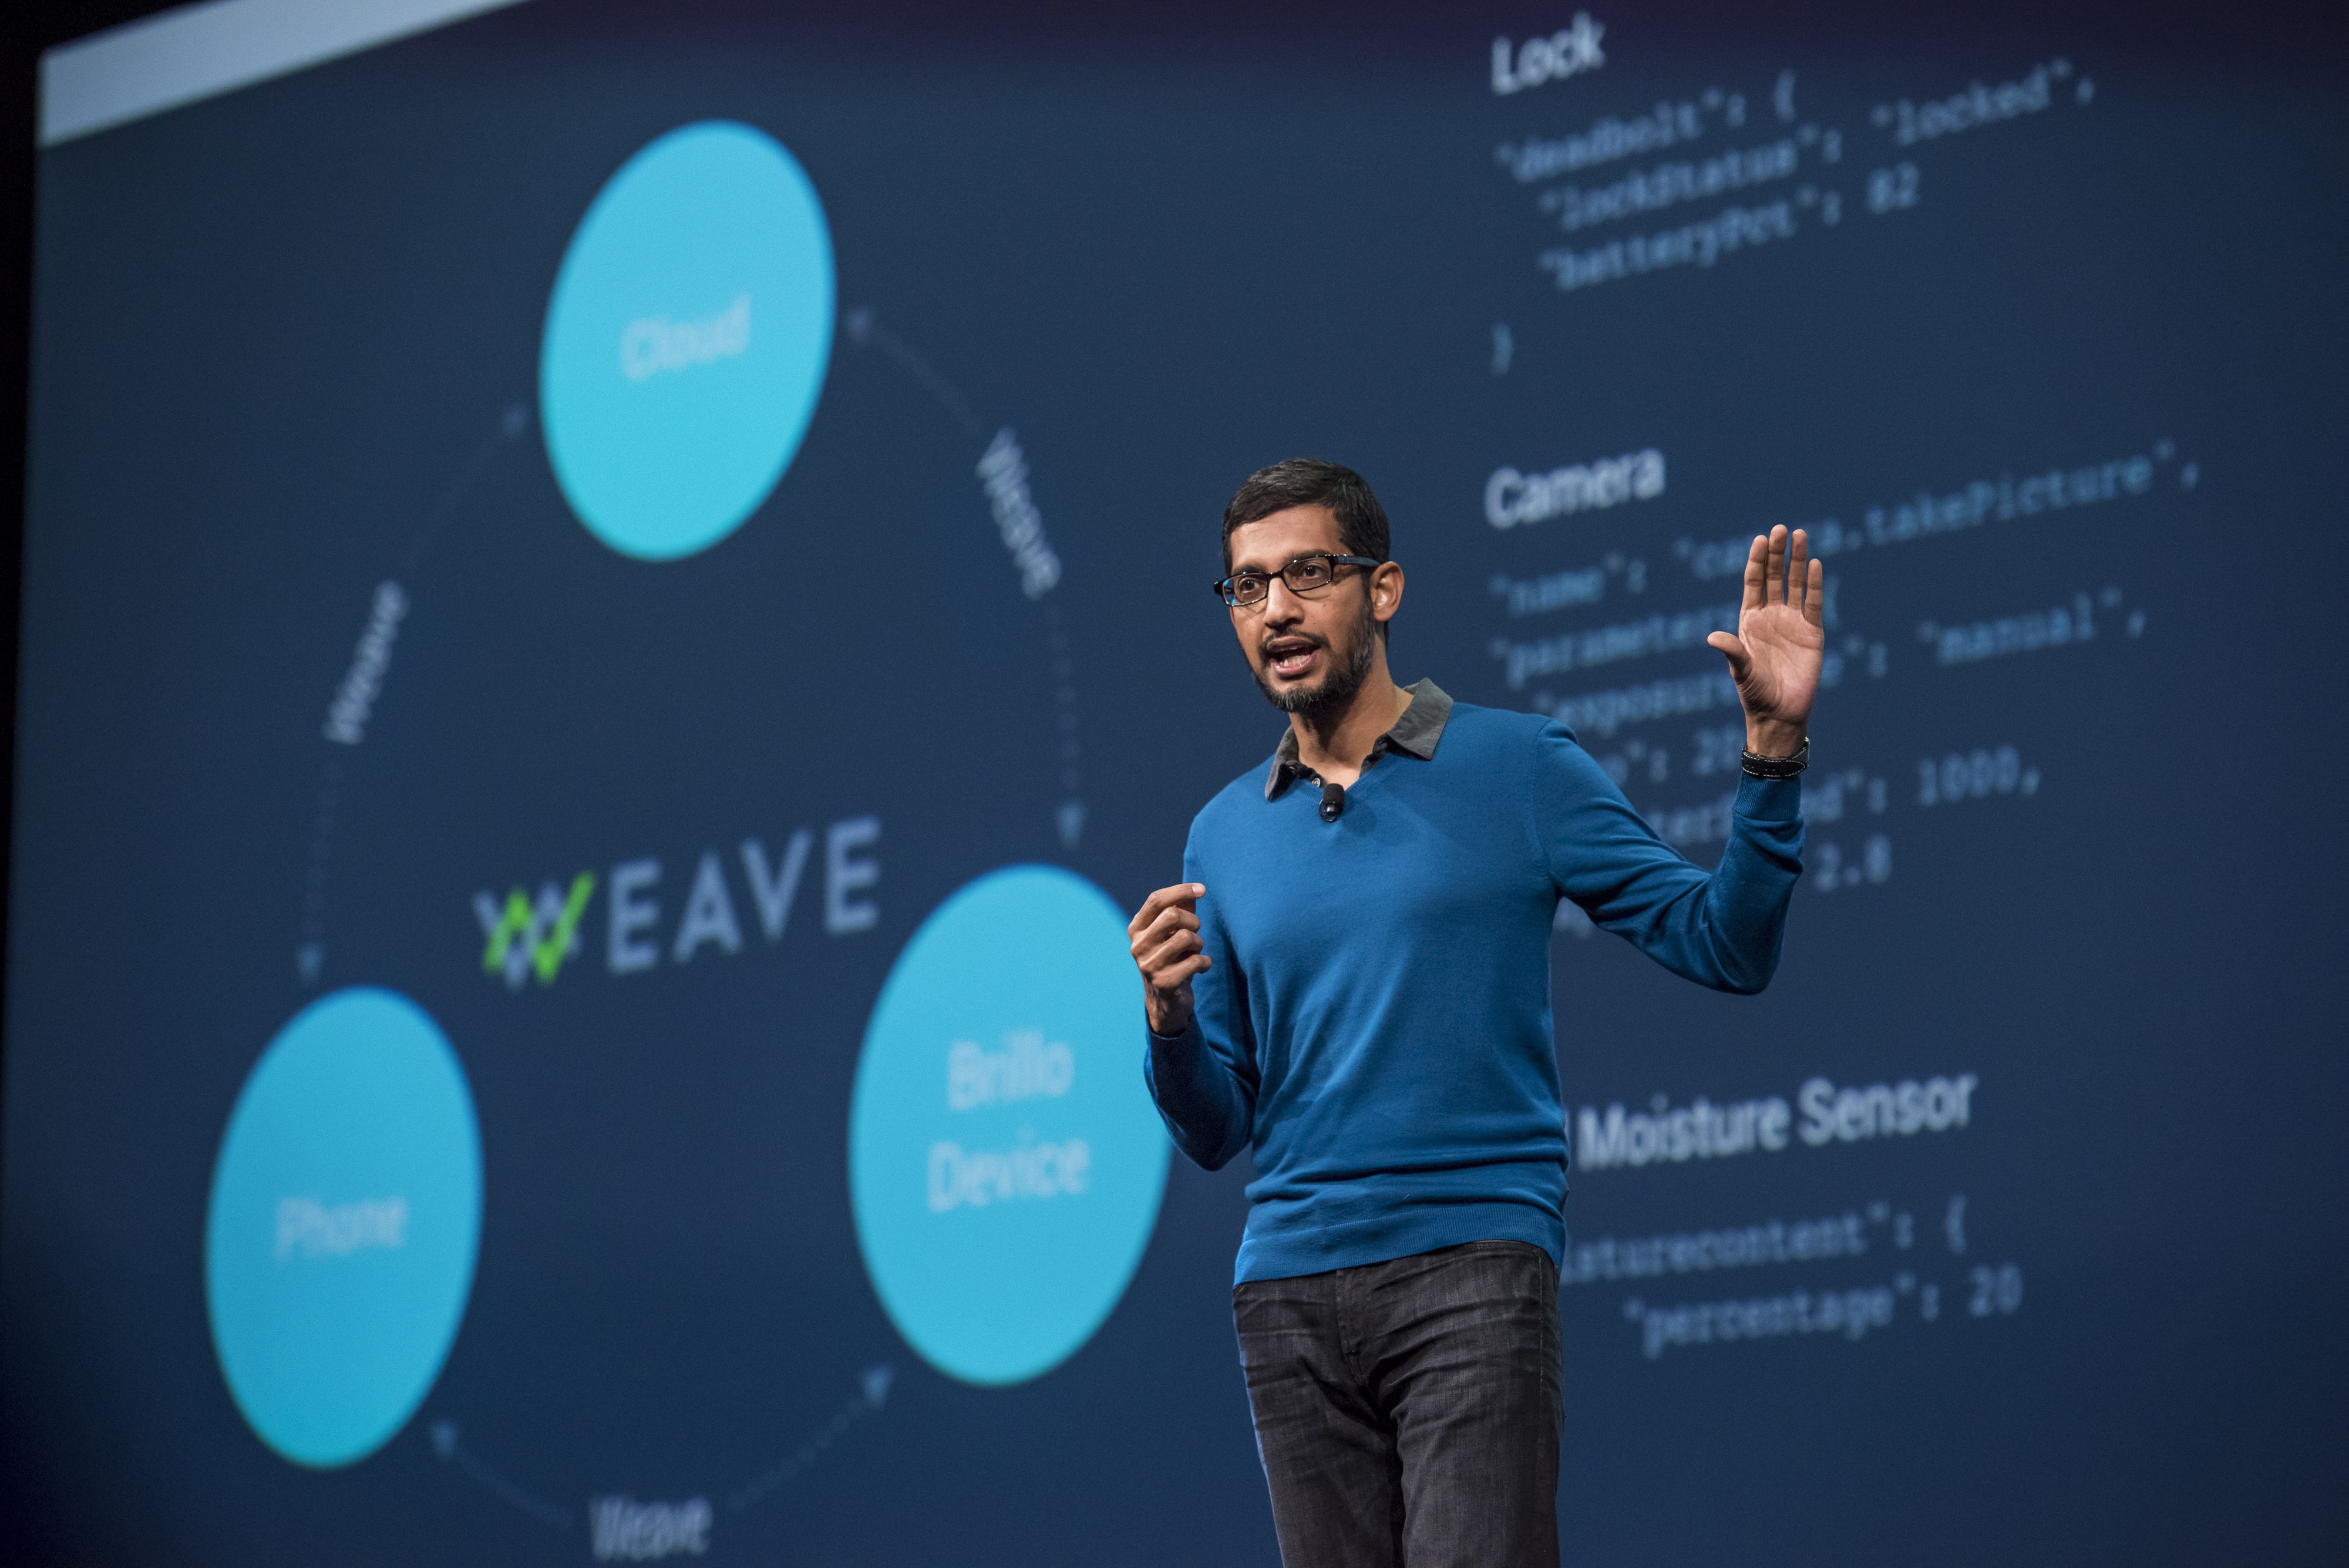 Sundar Pichai, senior vice-president of Products for Google Inc., speaks during the Google I/O Annual Developers Conference in San Francisco on May 28, 2015.